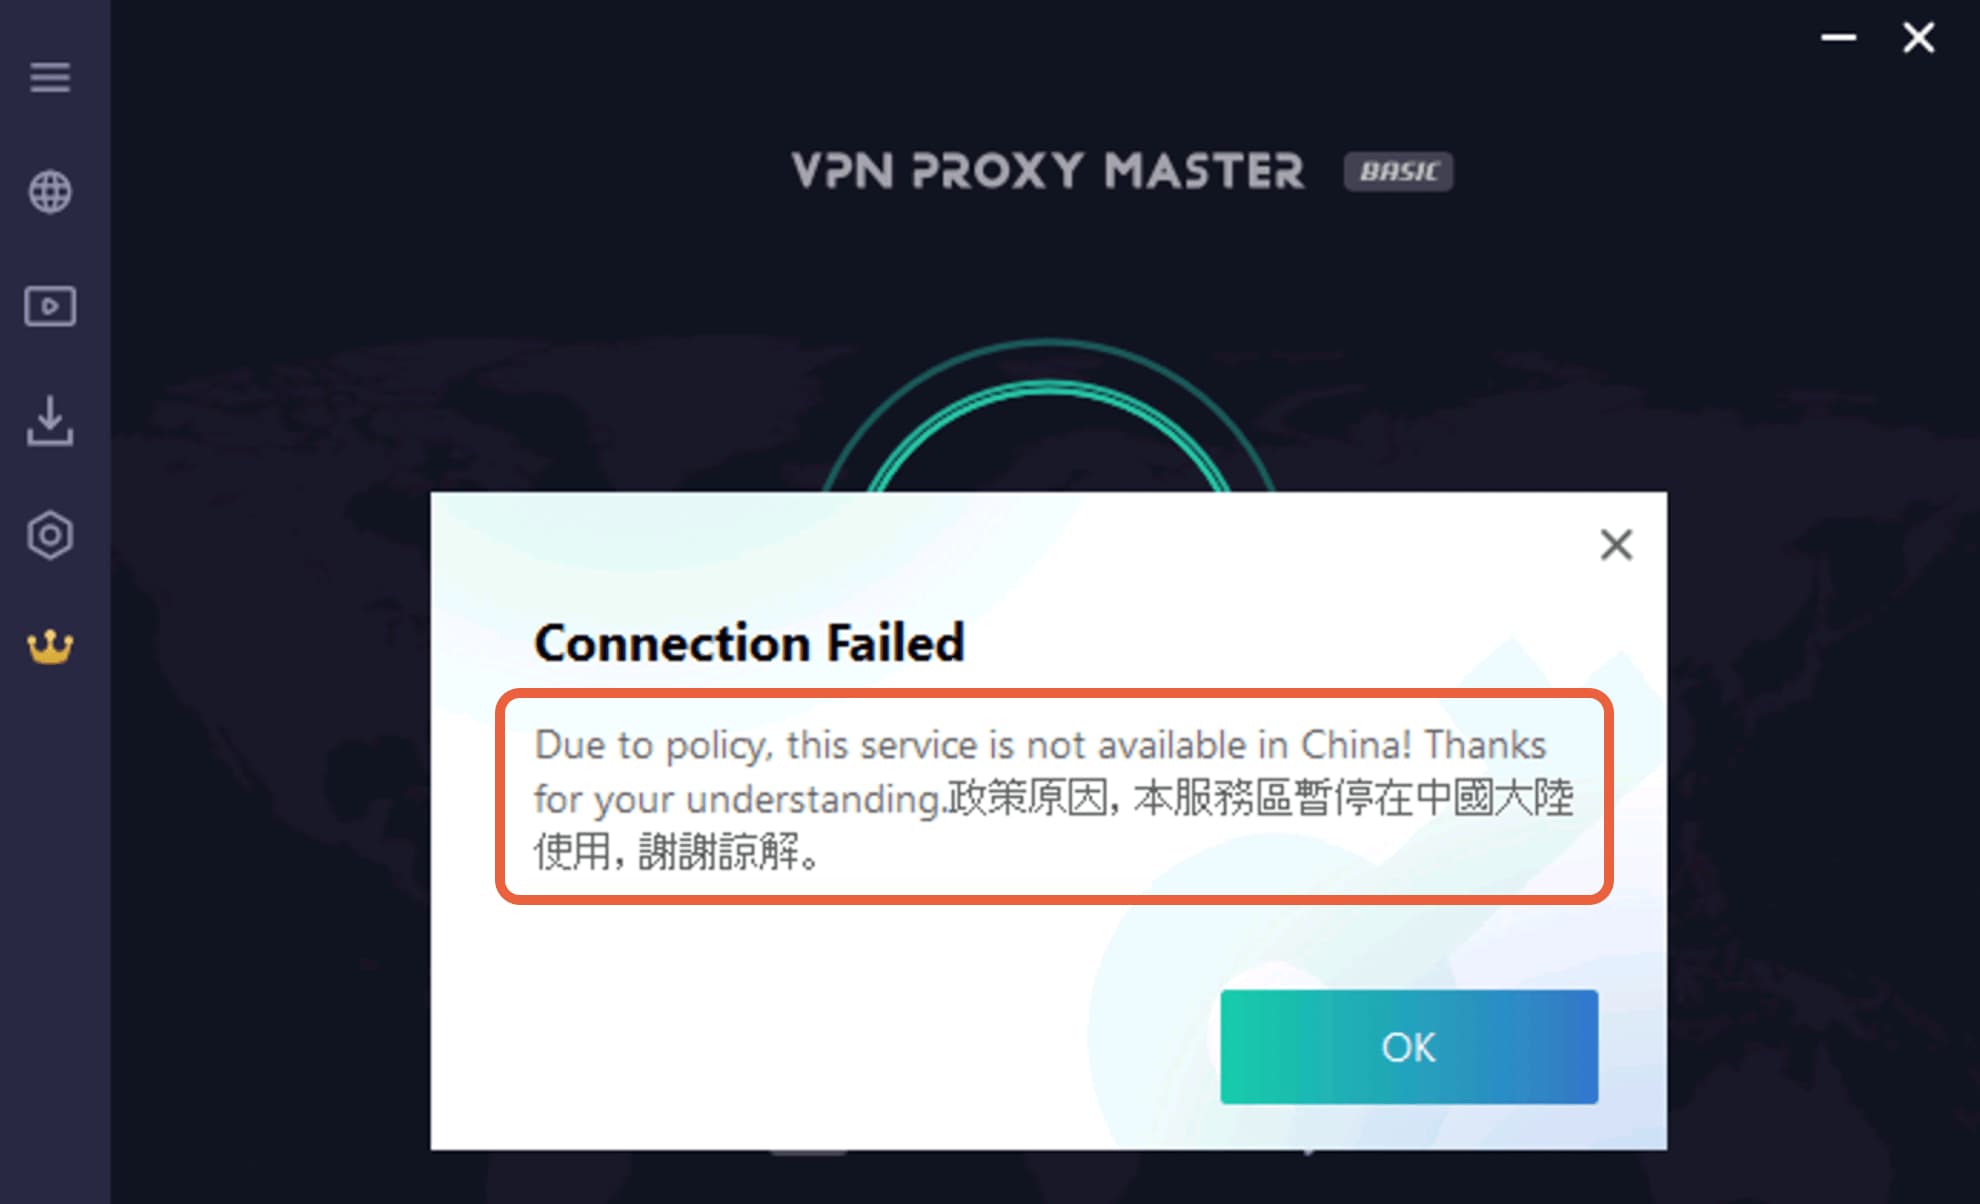 VPN Proxy Master with a notification that says: "Due to policy, this service is not available in China! Thanks for your understanding."